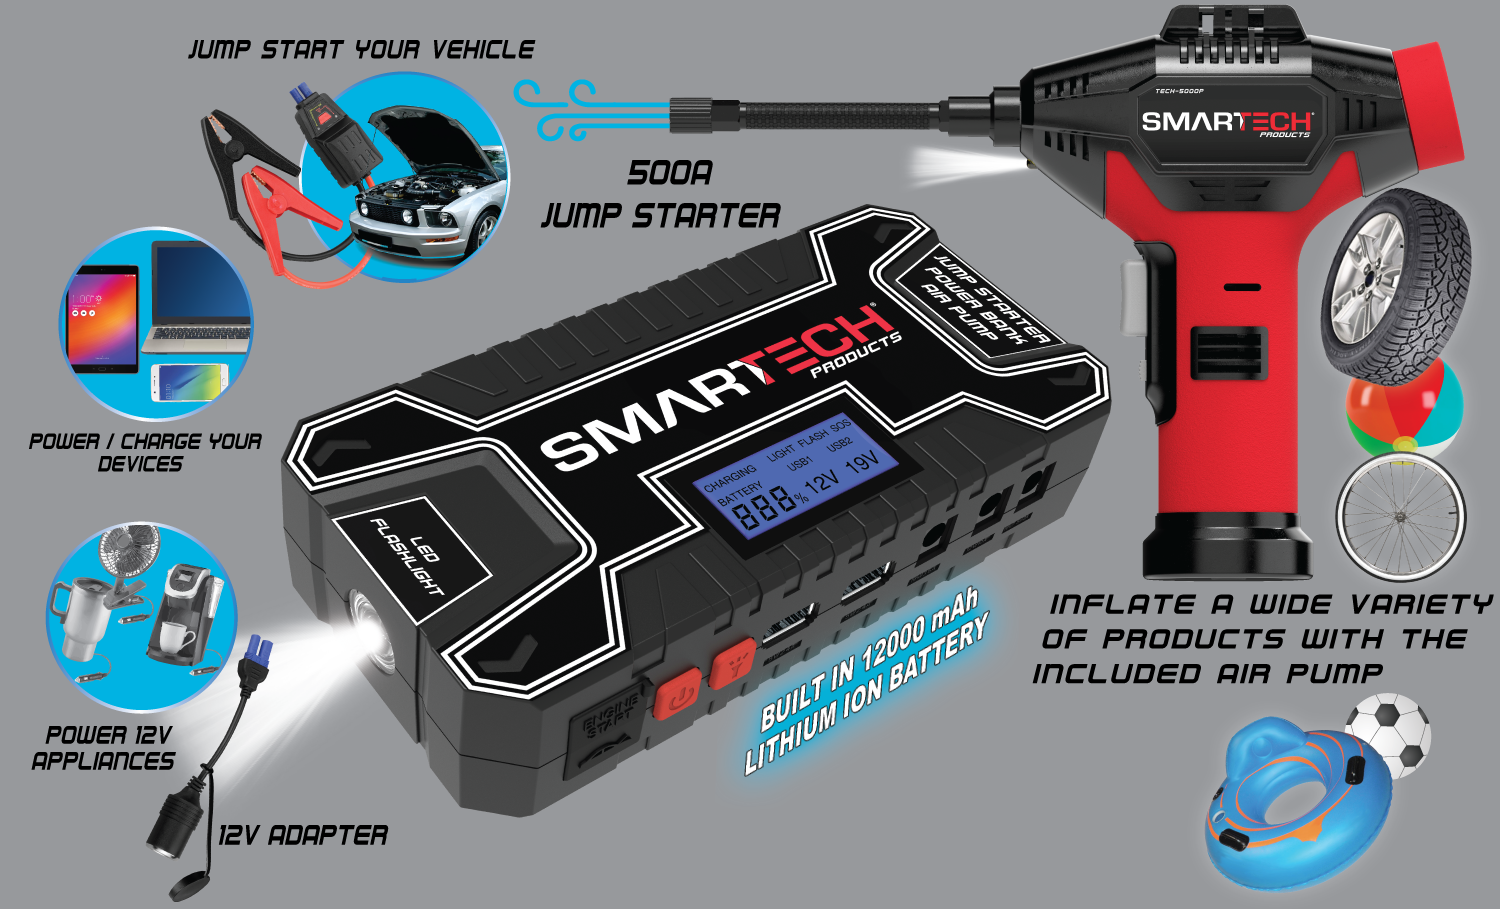 Portable ProLift Works Multi Function Power Bank With Smart Jump Starter Cables 